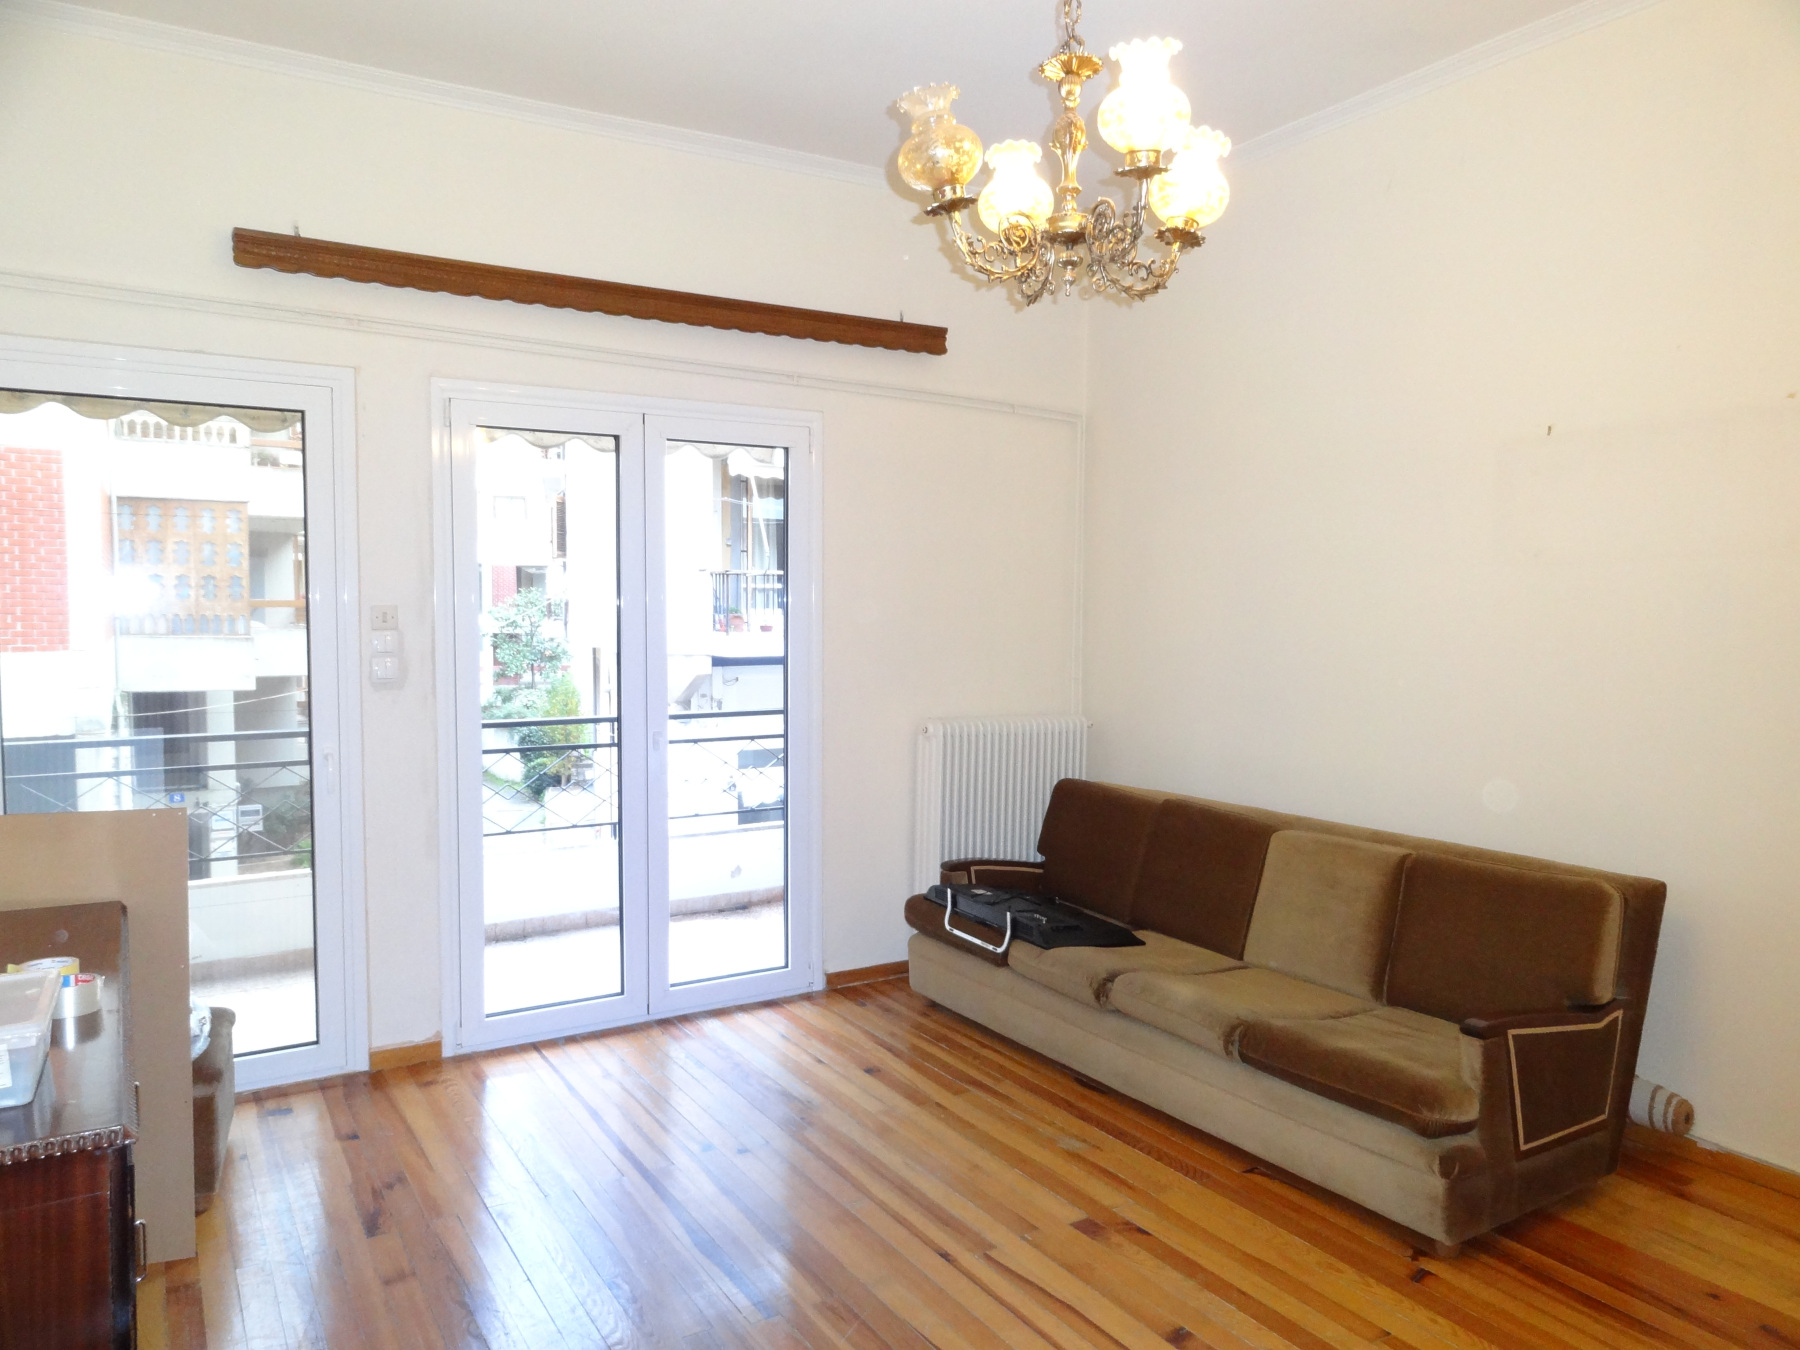 For rent, a spacious 1 bedroom apartment of 74 sq.m. 1st floor in the center of Ioannina near the library